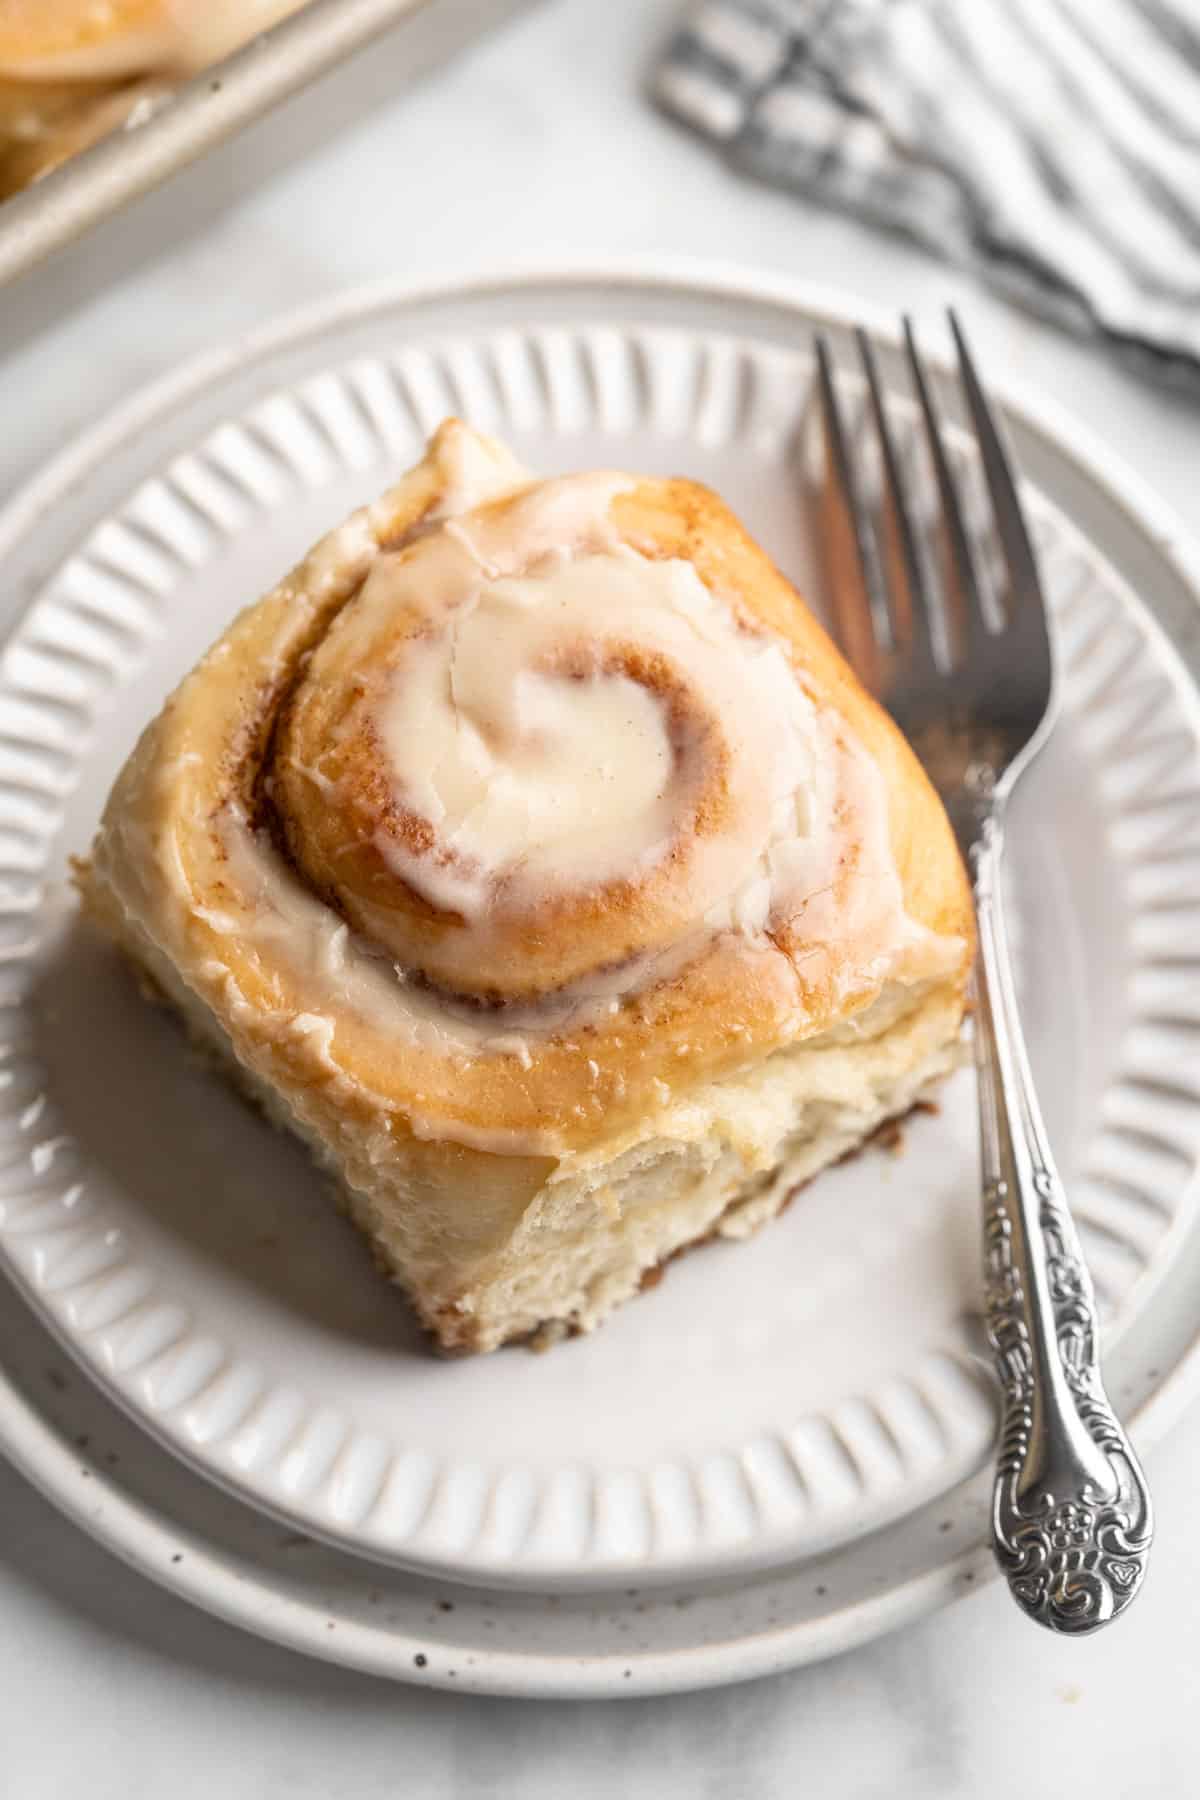 Cinnamon roll on a white plate with a fork.